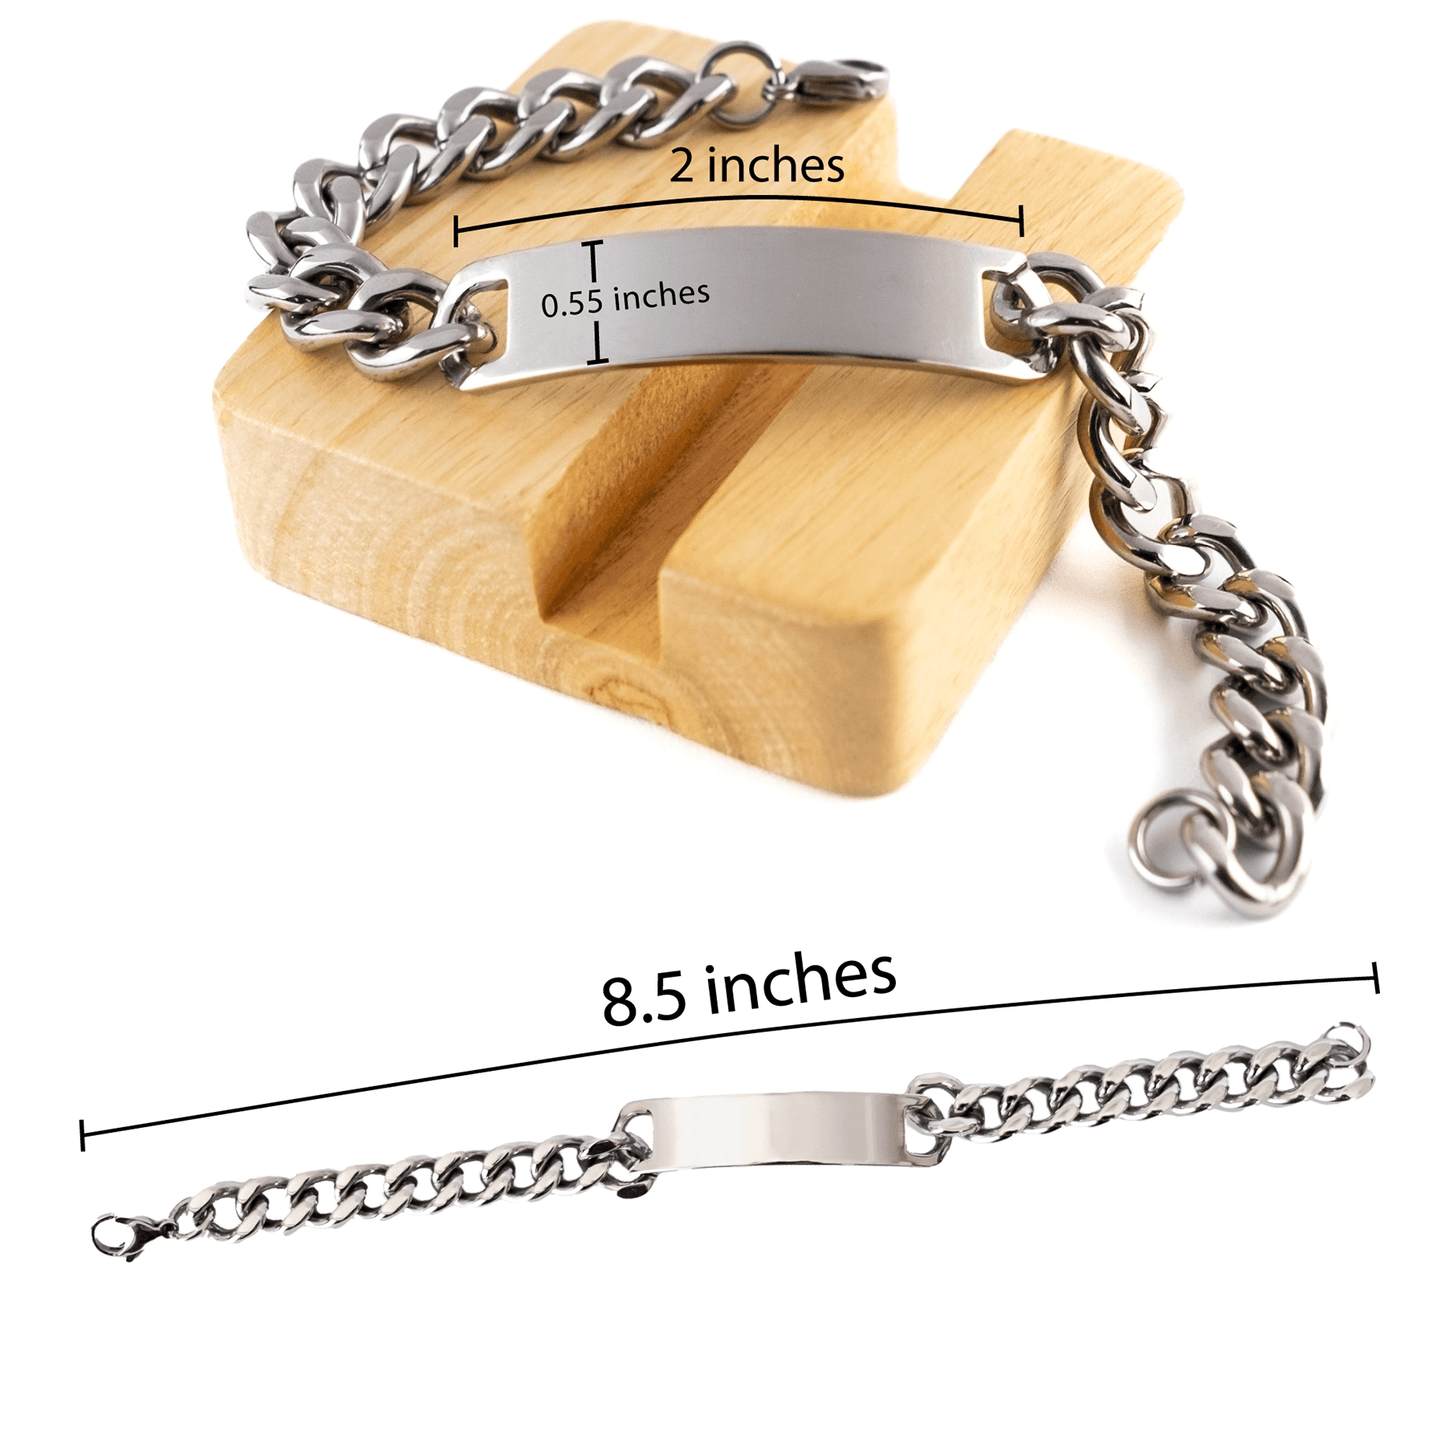 Yoga Instructor Cuban Chain Link Engraved Bracelet - Thanks for being who you are - Birthday Christmas Jewelry Gifts Coworkers Colleague Boss - Mallard Moon Gift Shop